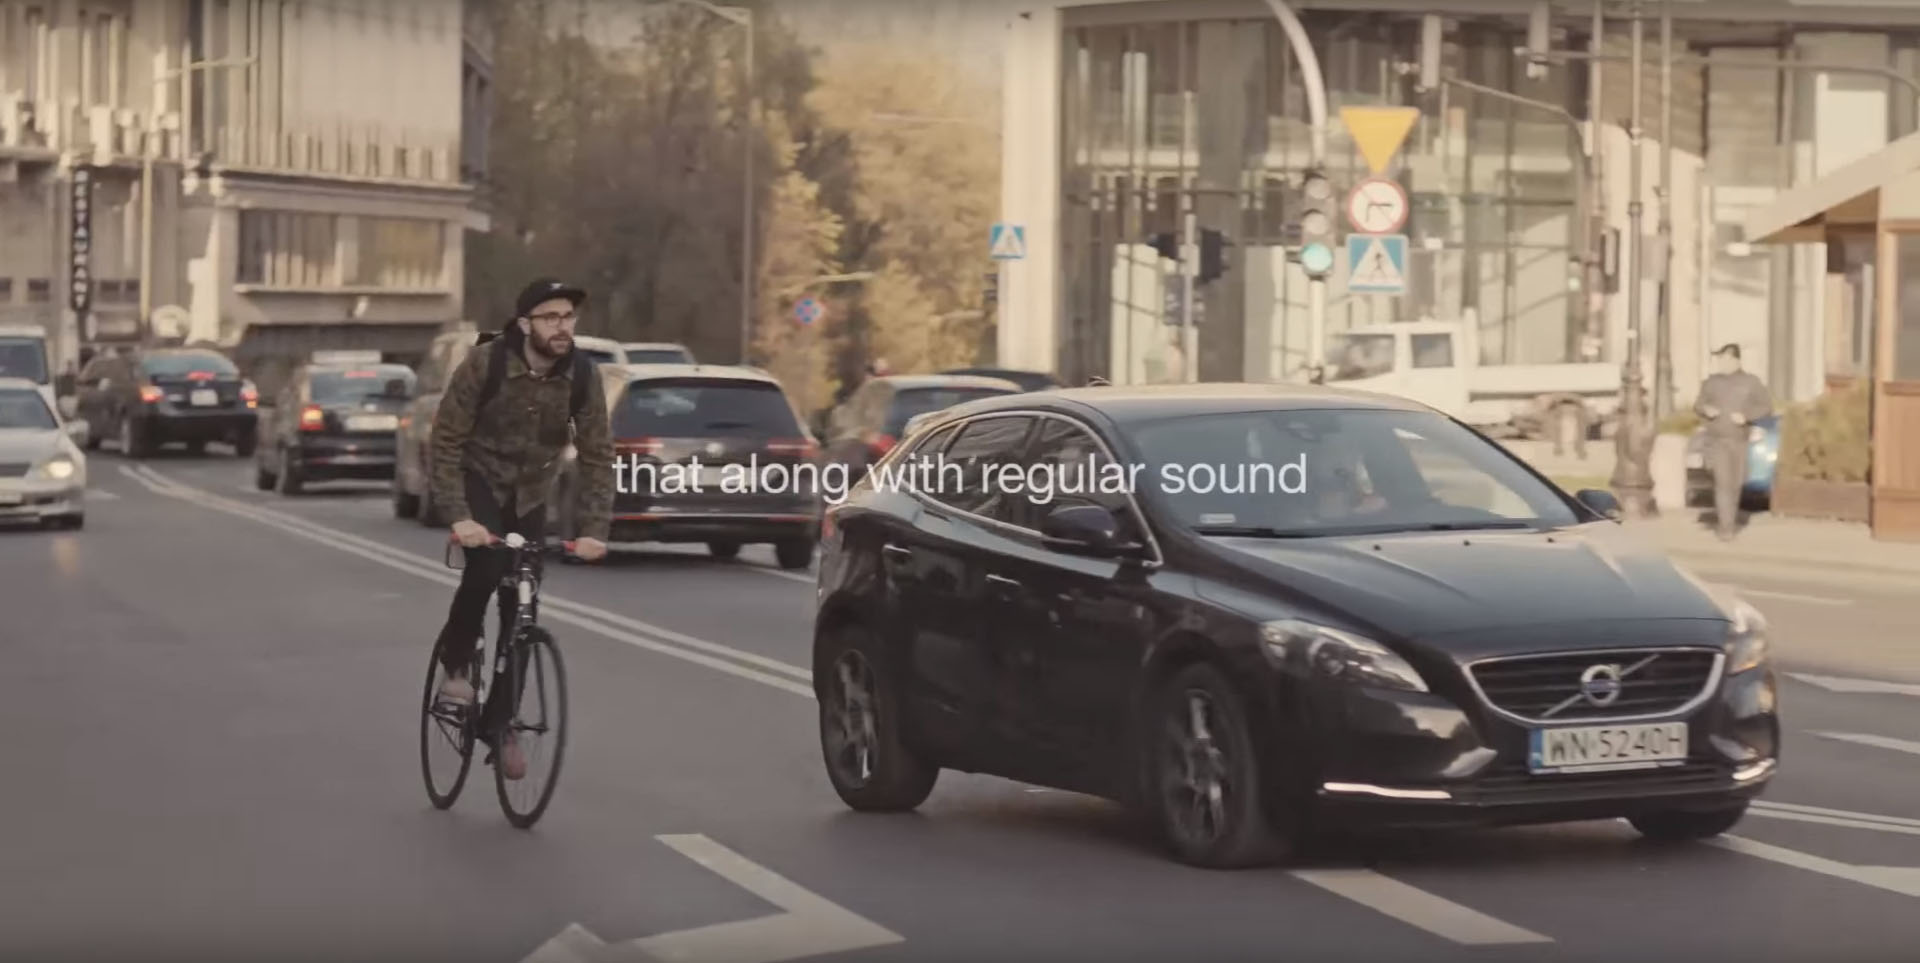 AXA Smart Bell Plays Alert Sounds on the Radios of Nearby Cars - autoevolution